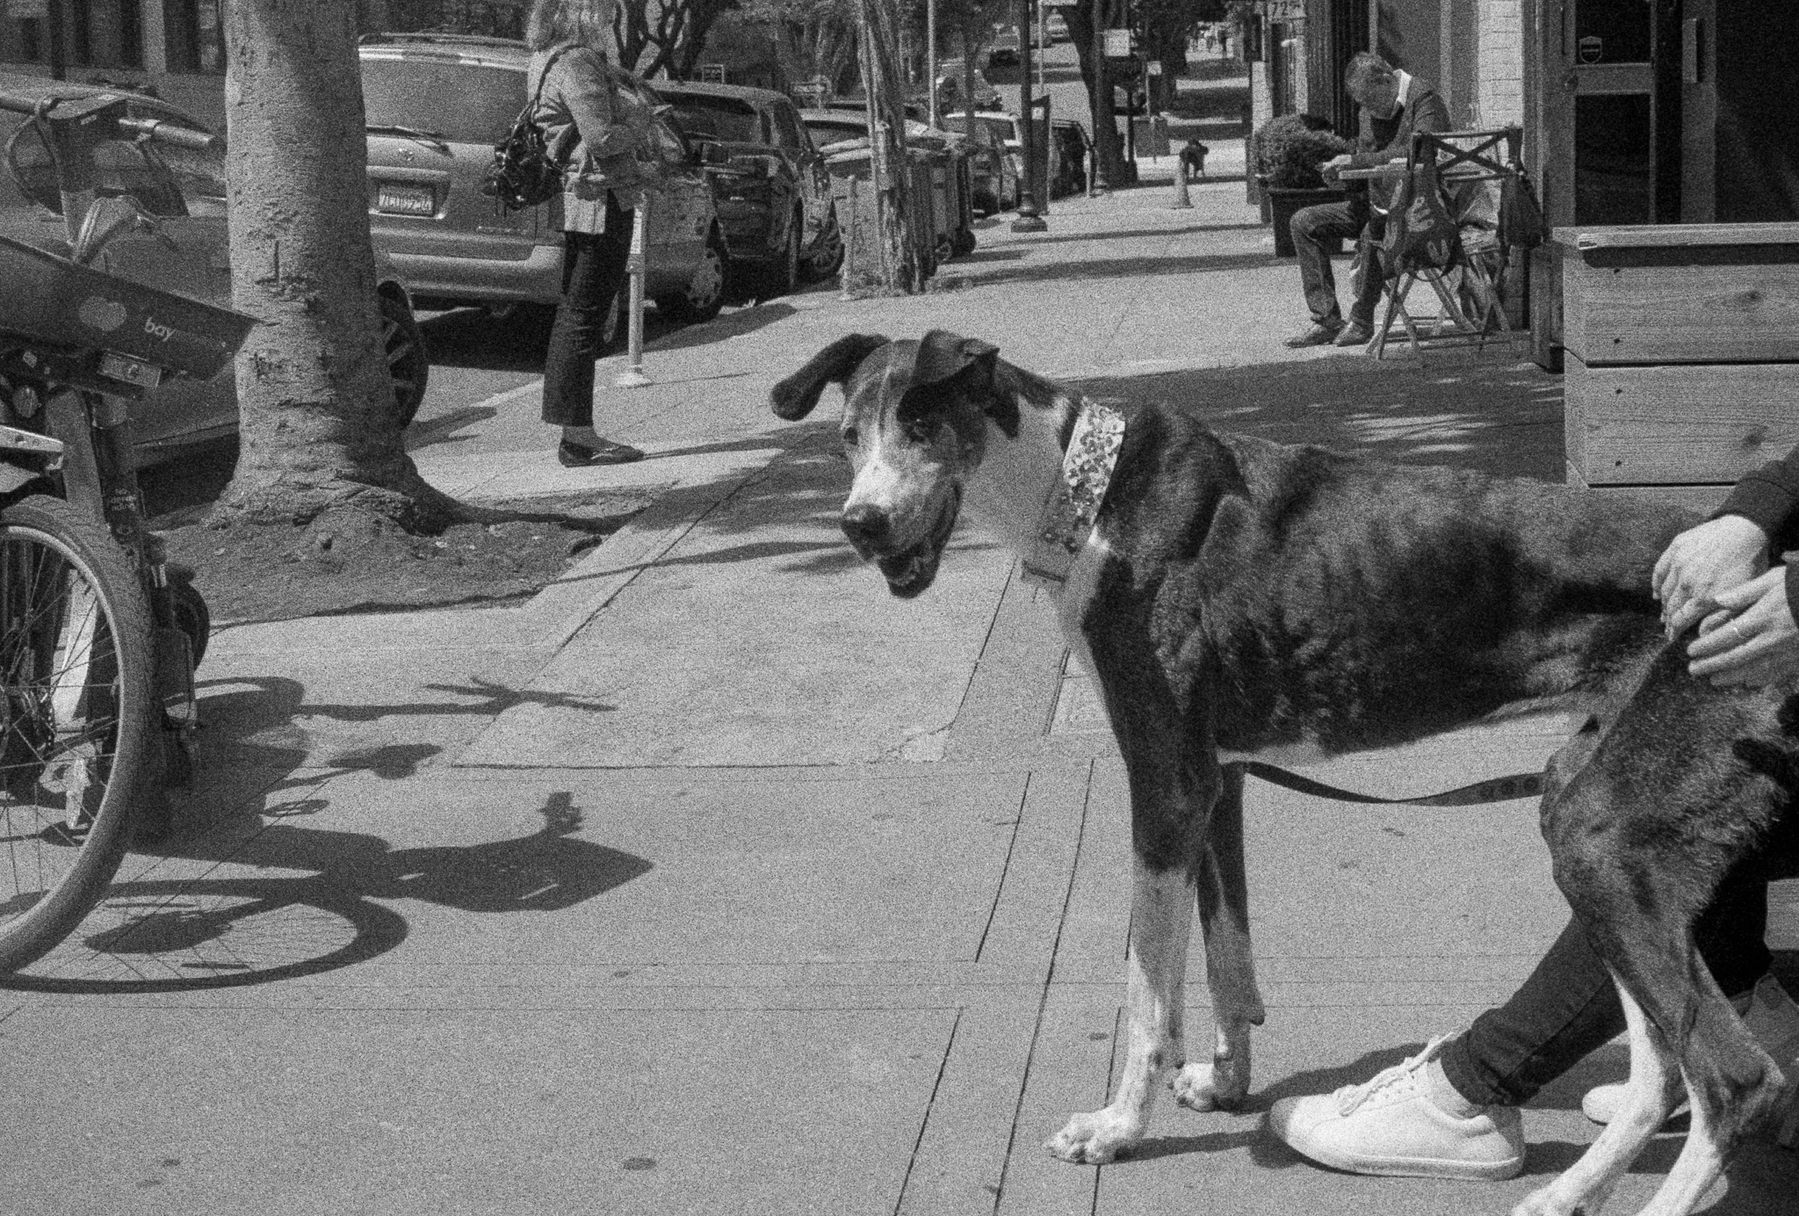 a scan of a black and white photo showing a large dog trying to sit on his owner at a street side cafe